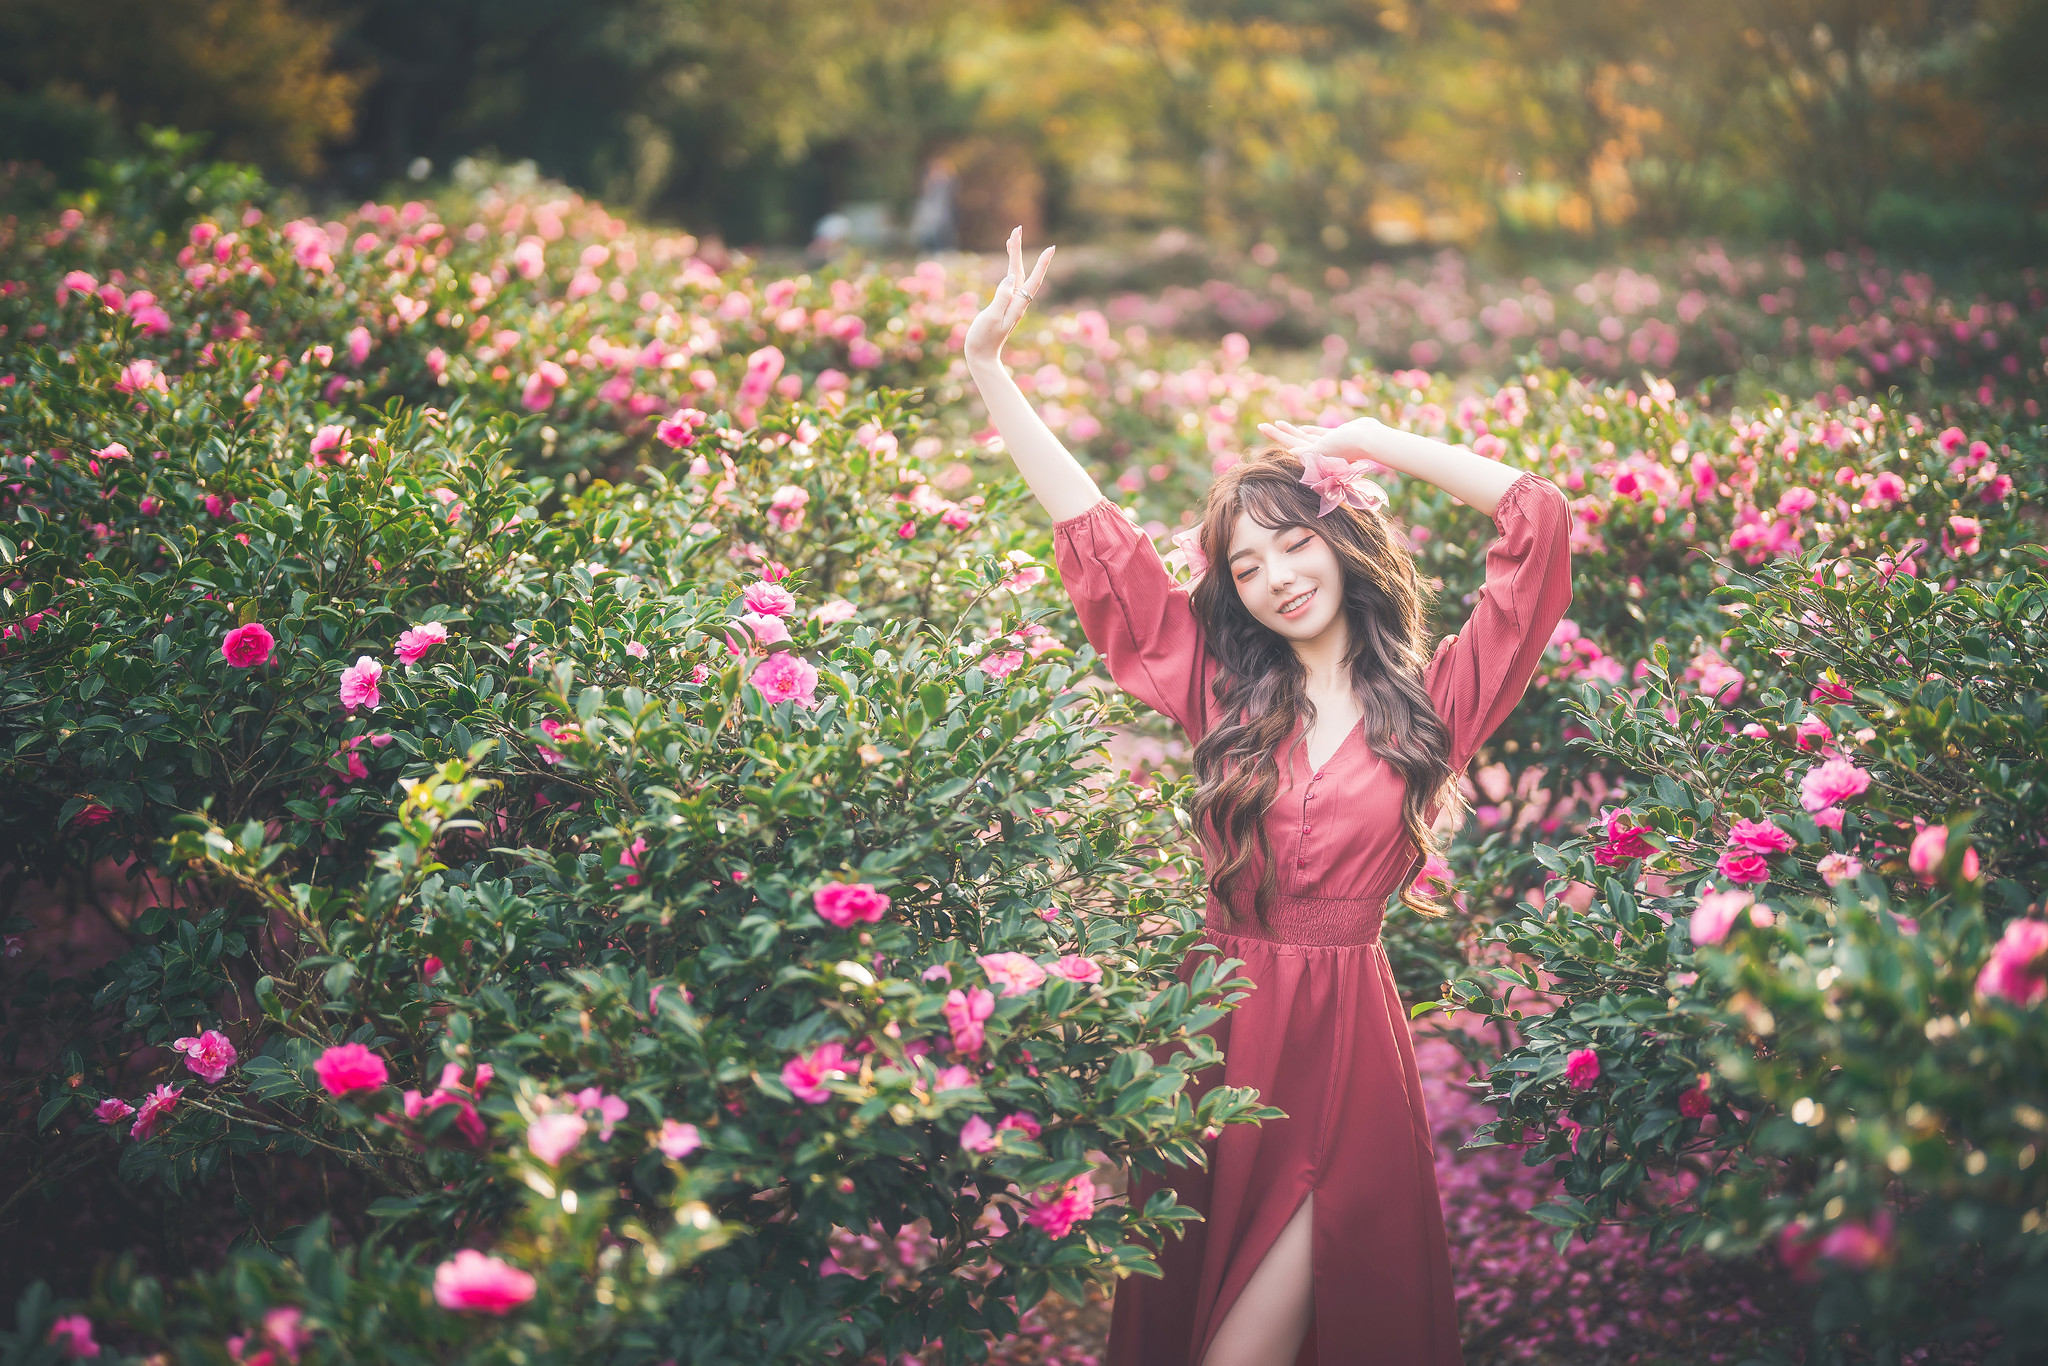 People 2048x1366 Asian women model women outdoors happy red clothing arms up outdoors flowers plants brunette Chuchu